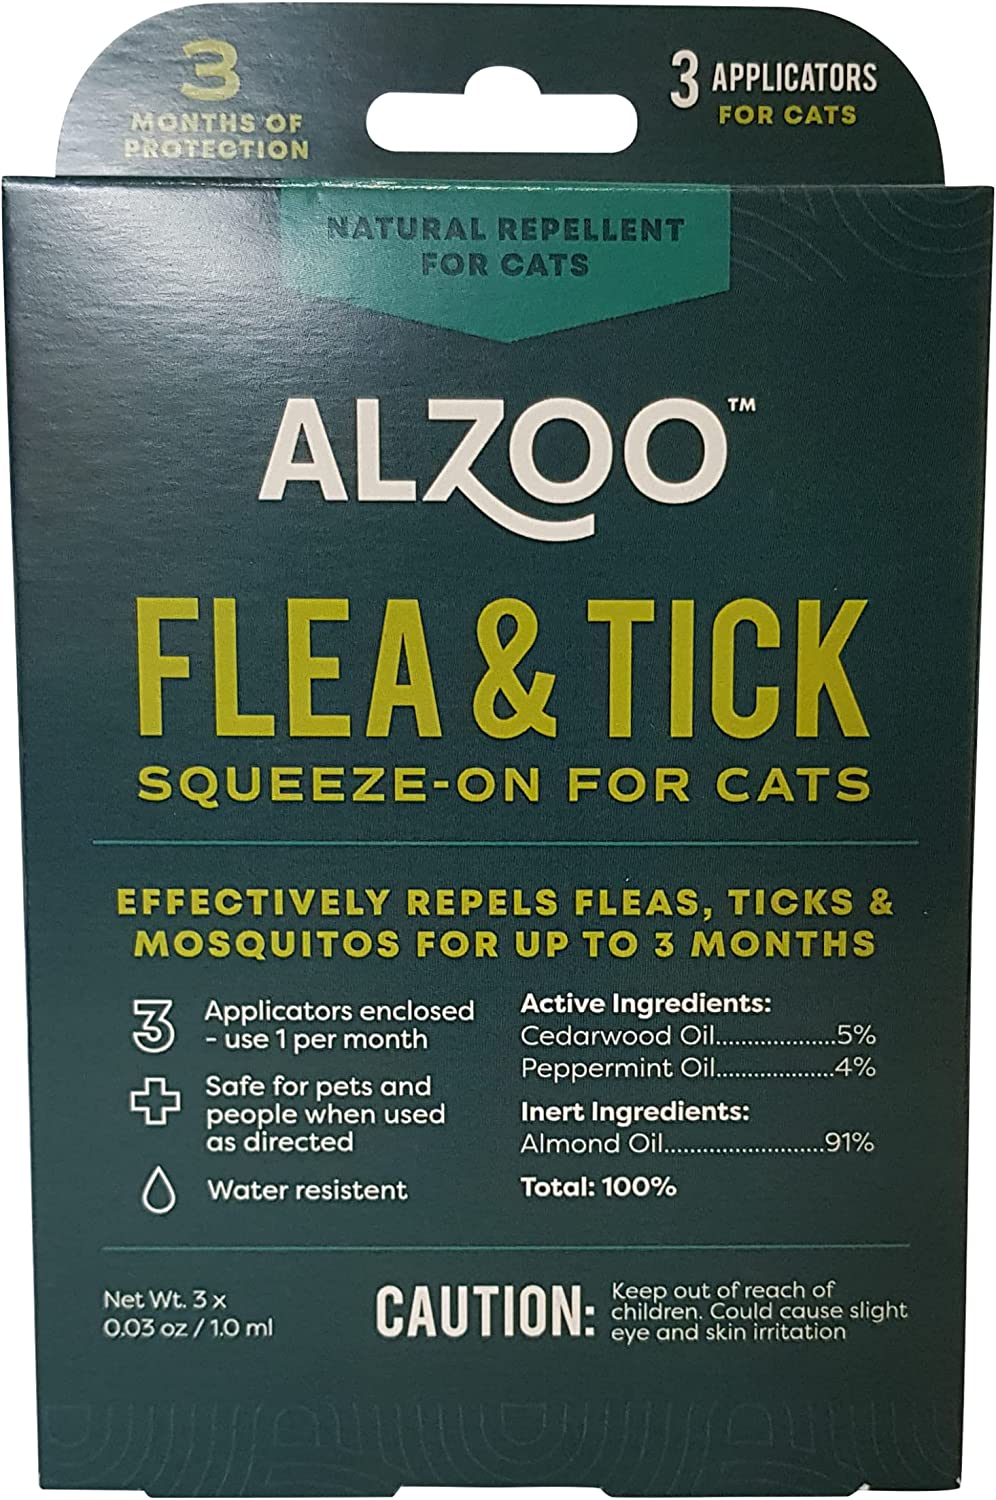 ALZOO Flea & Tick Repellent Squeeze-On for Cats - Pack of 3